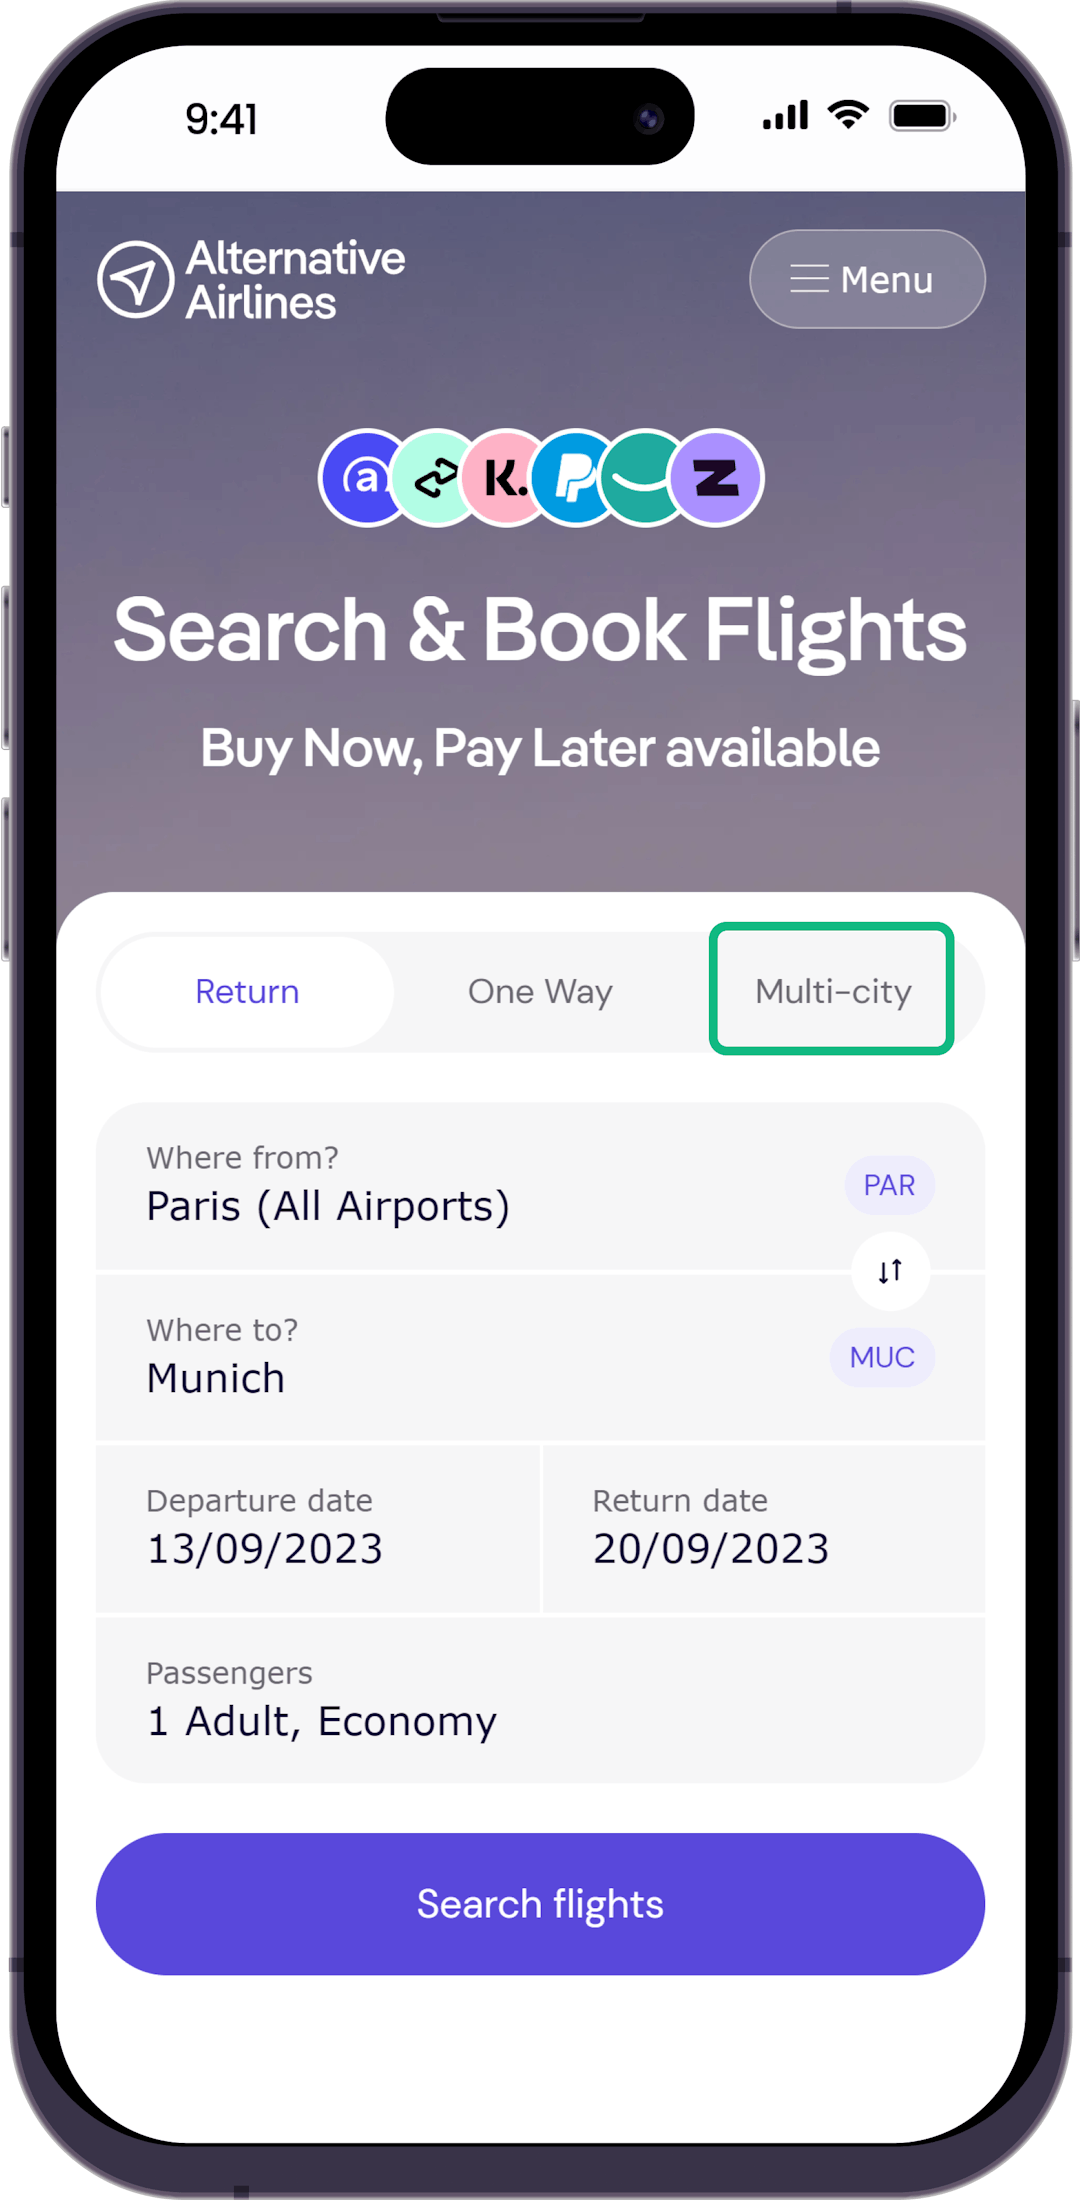 Step 1 - Select the multi-city option in the search form